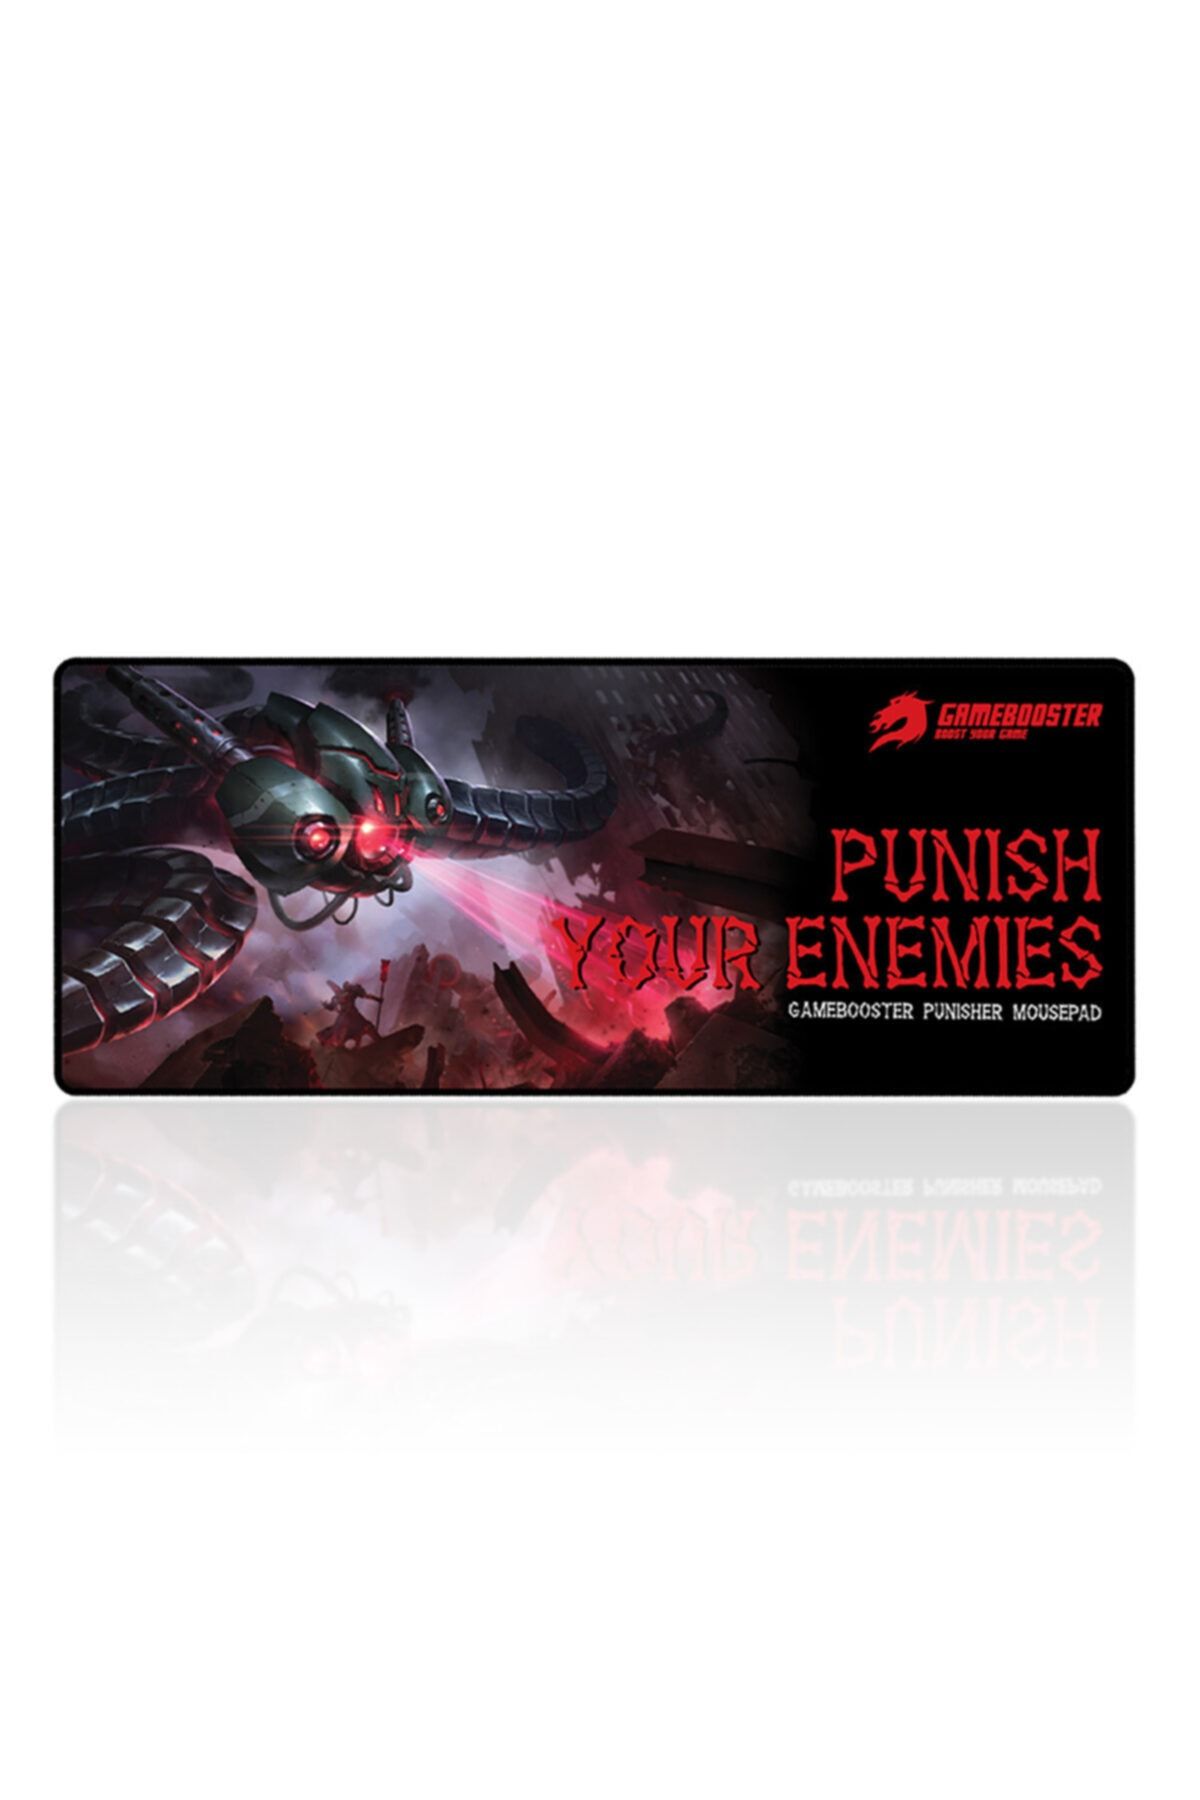 Gamebooster "punisher" Xl Gaming Mouse Pad (740x300mm)